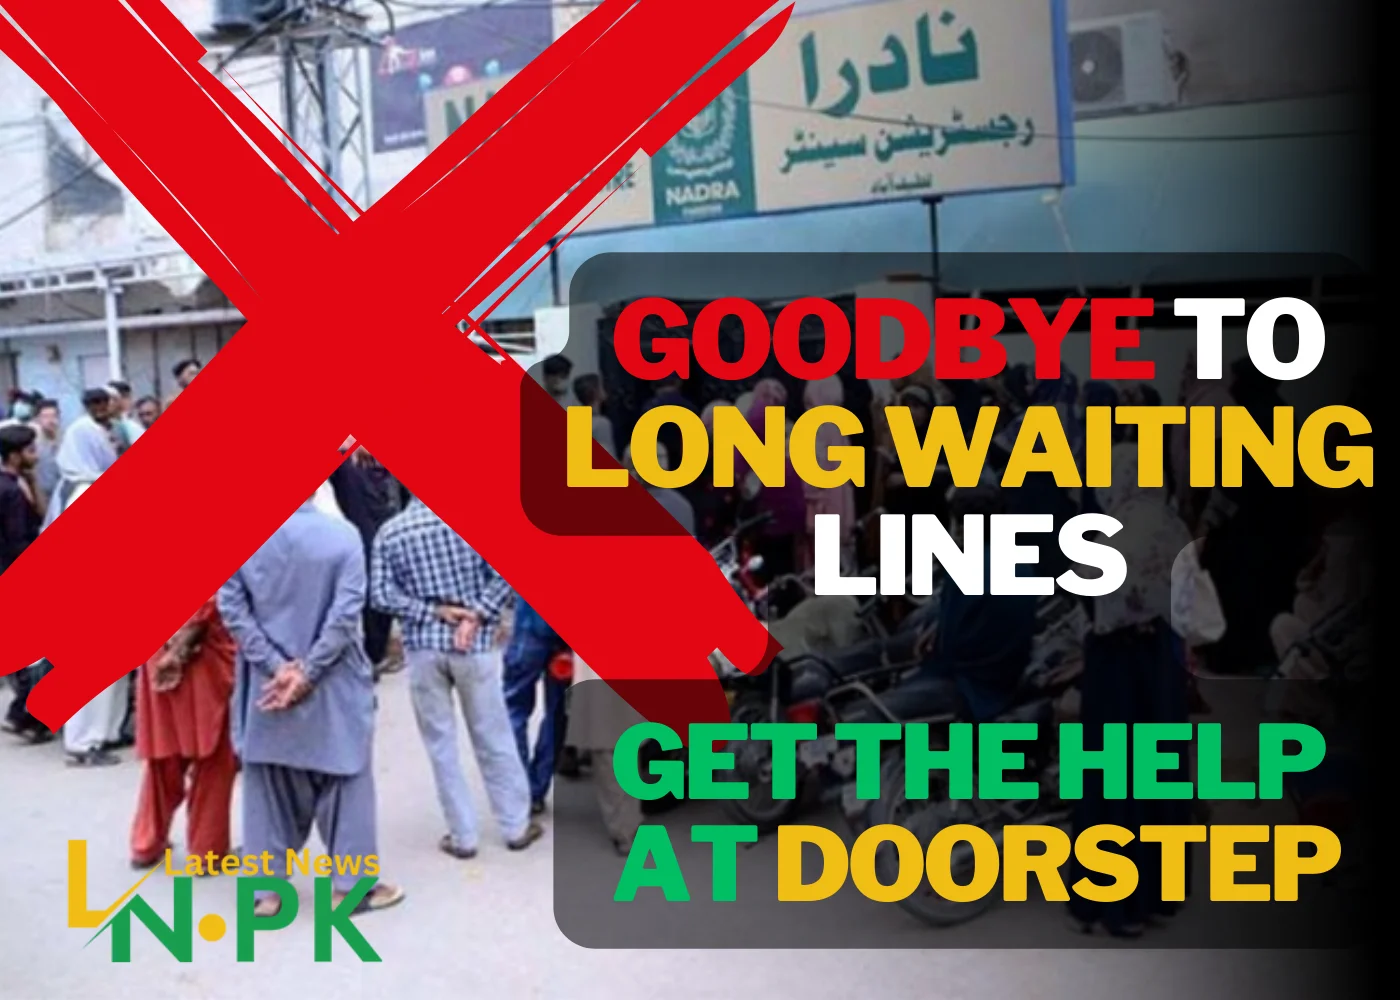 NADRA's New Initiatives Make It Easier for Everyone to Get the Help They Need at Doorstep| Goodbye to long waiting Lines